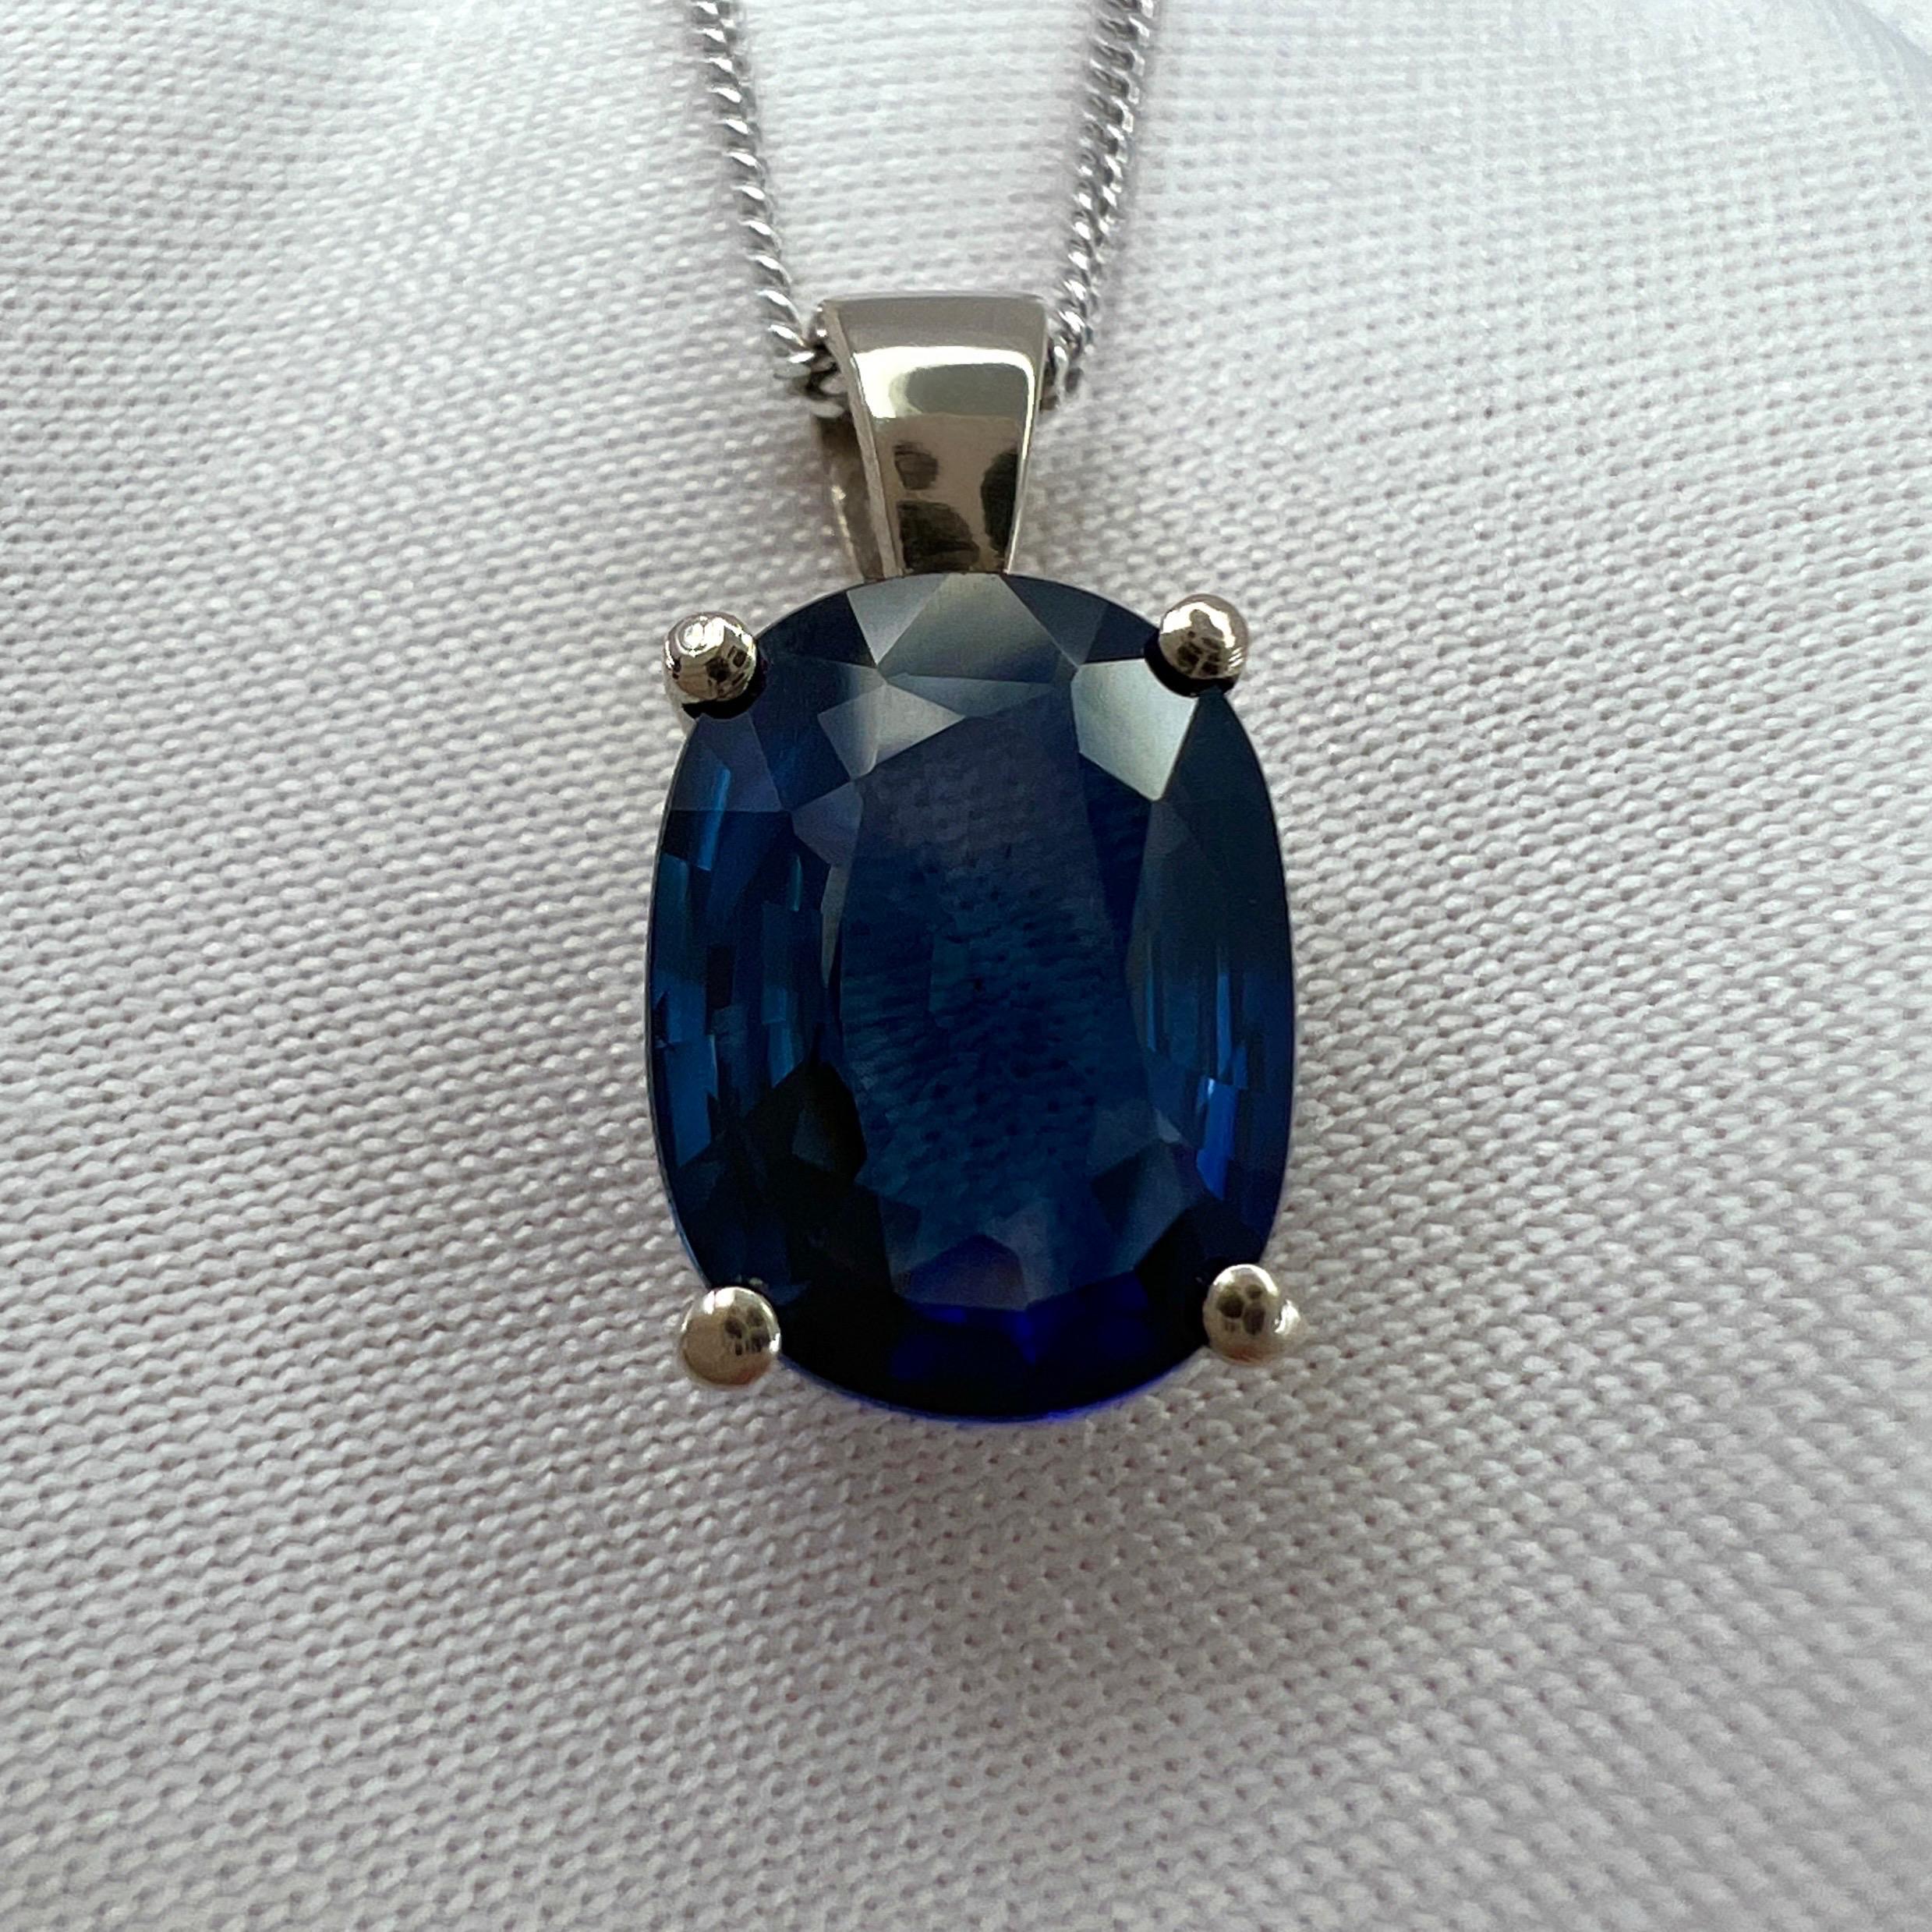 Vivid Blue Ceylon Sapphire 18k White Gold Oval Cut Solitaire Pendant Necklace.

1.85 Carat sapphire with a beautiful vivid blue colour and excellent clarity, very clean stone.

The sapphire also has a very good cushion cut, set in a fine 18k white